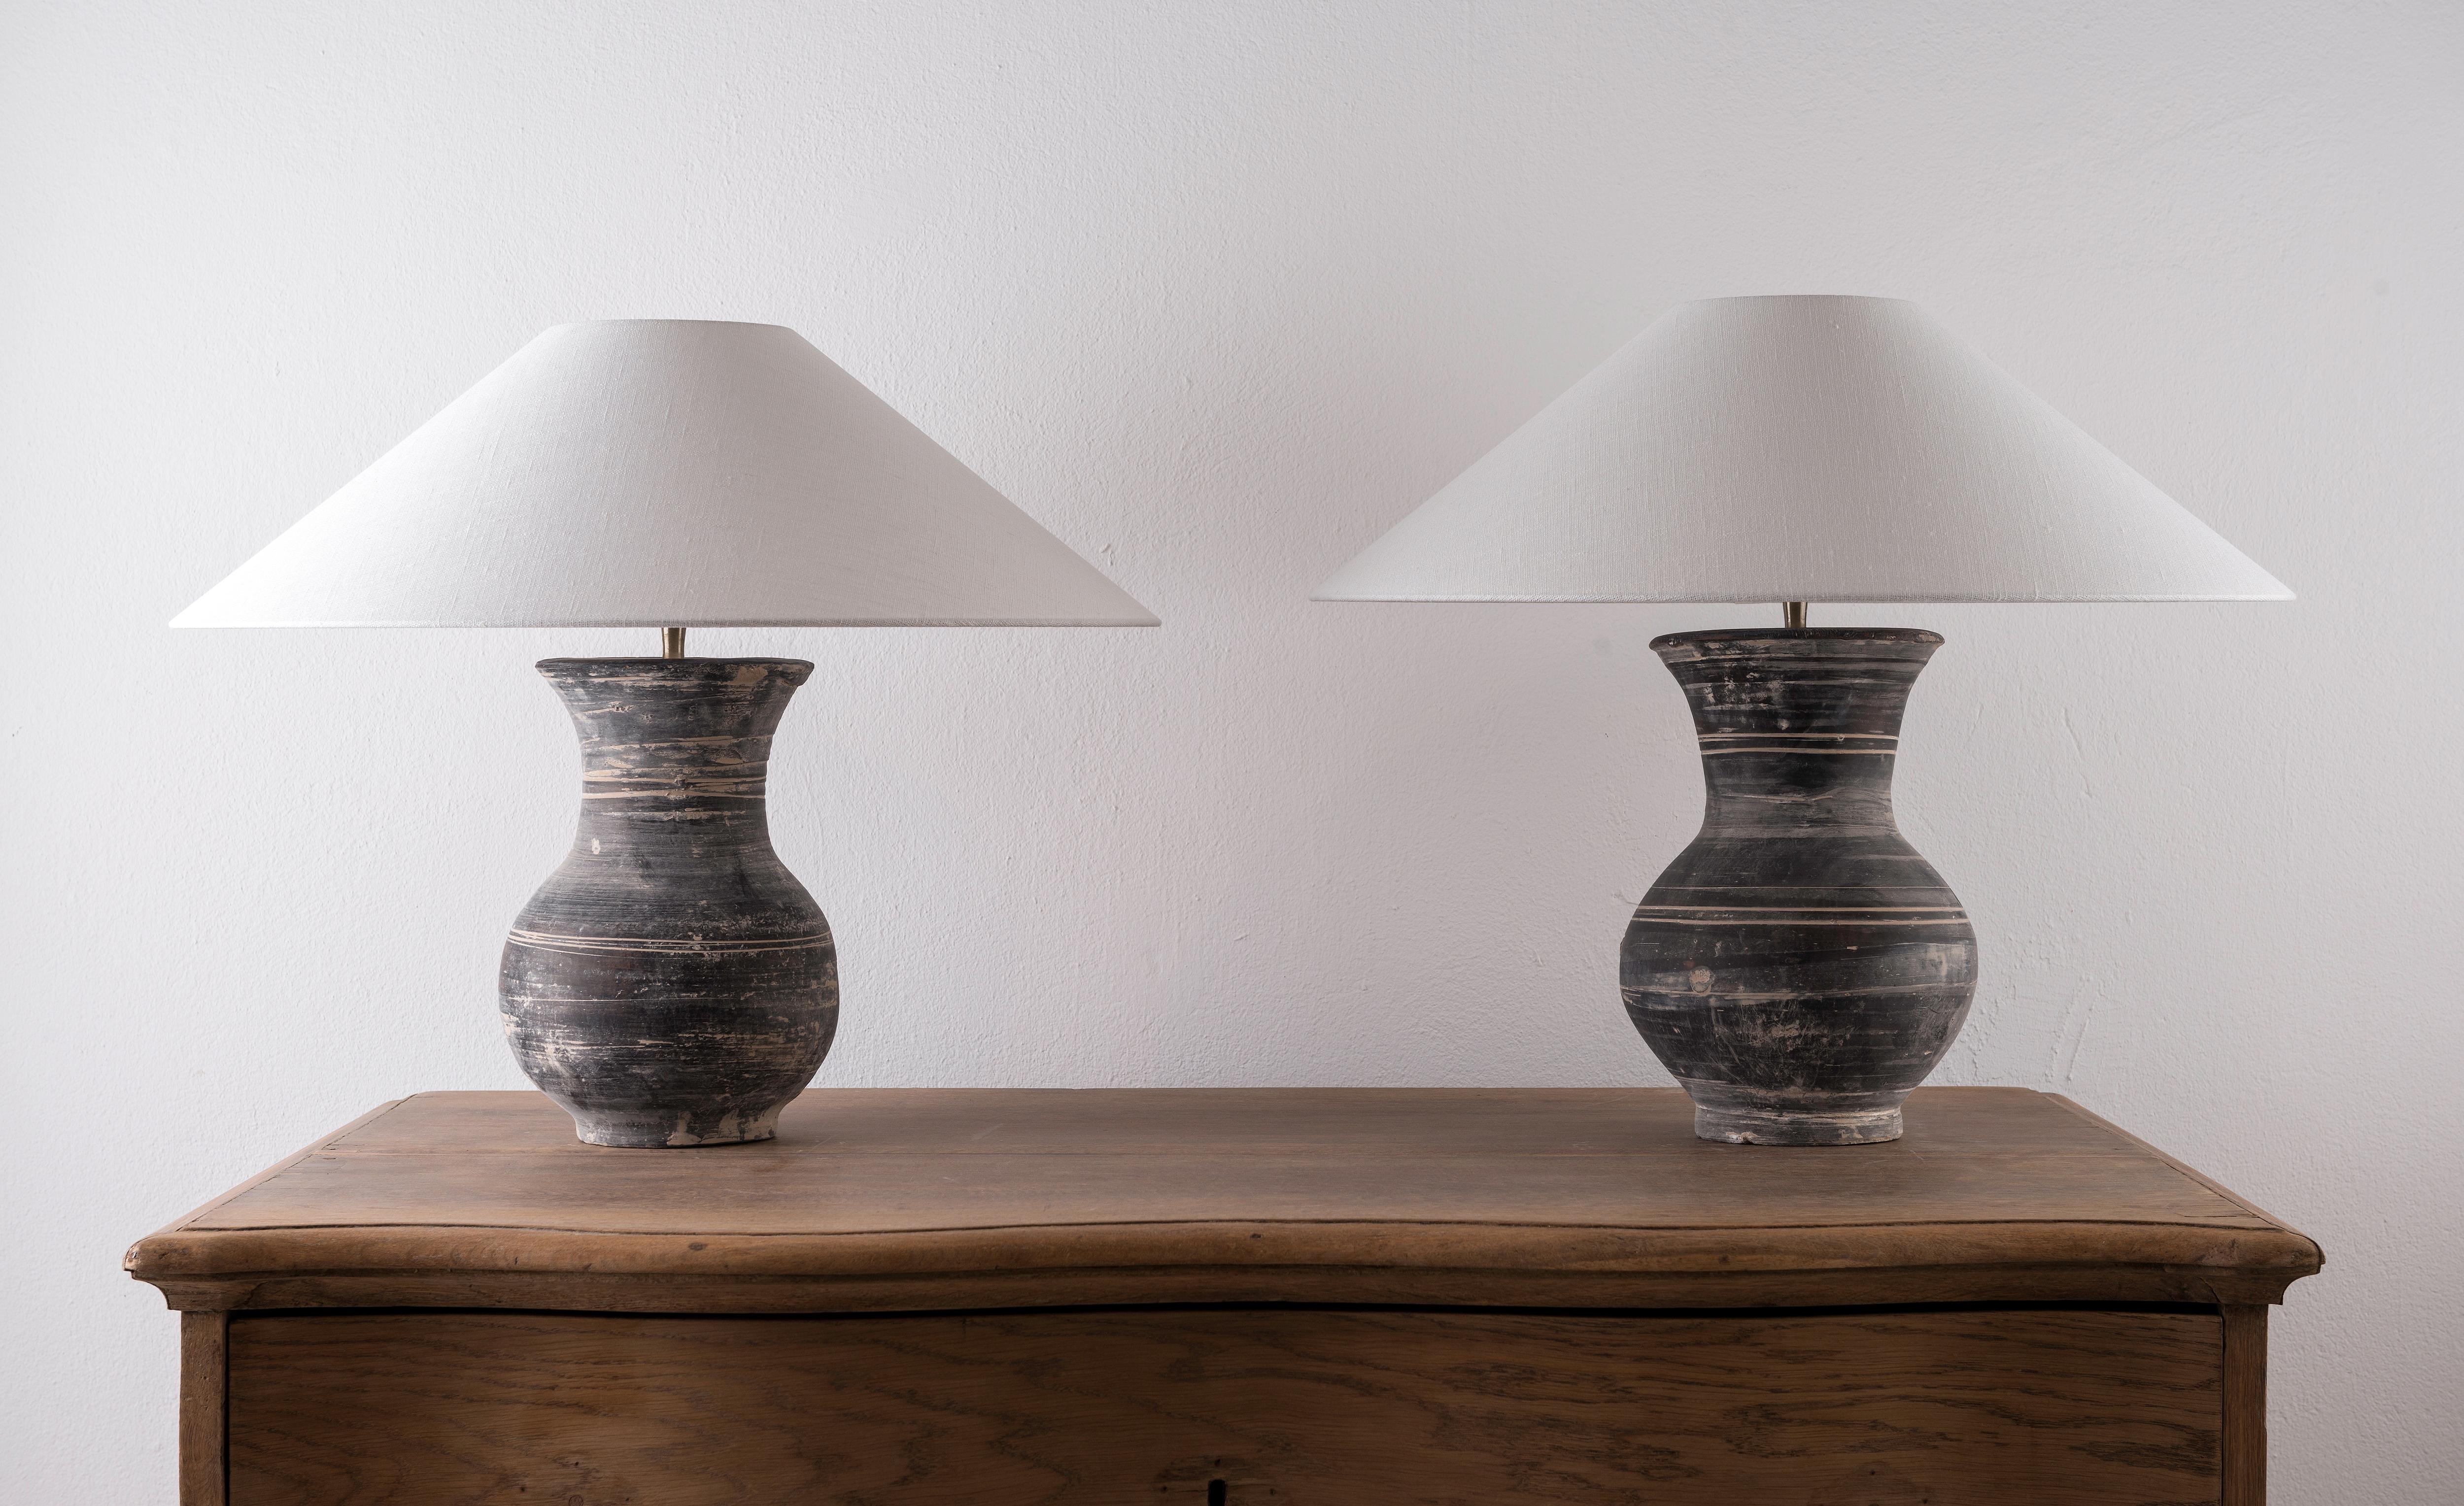 A beautiful pair of unglazed Han dynasty style vases of a very elegant form.
Expectedly mounted as lamps. High quality mount with a brass adjustable pivot joint. Shade handmade in Belgium.
The vases are from Zhejiang, china, mount and shade are